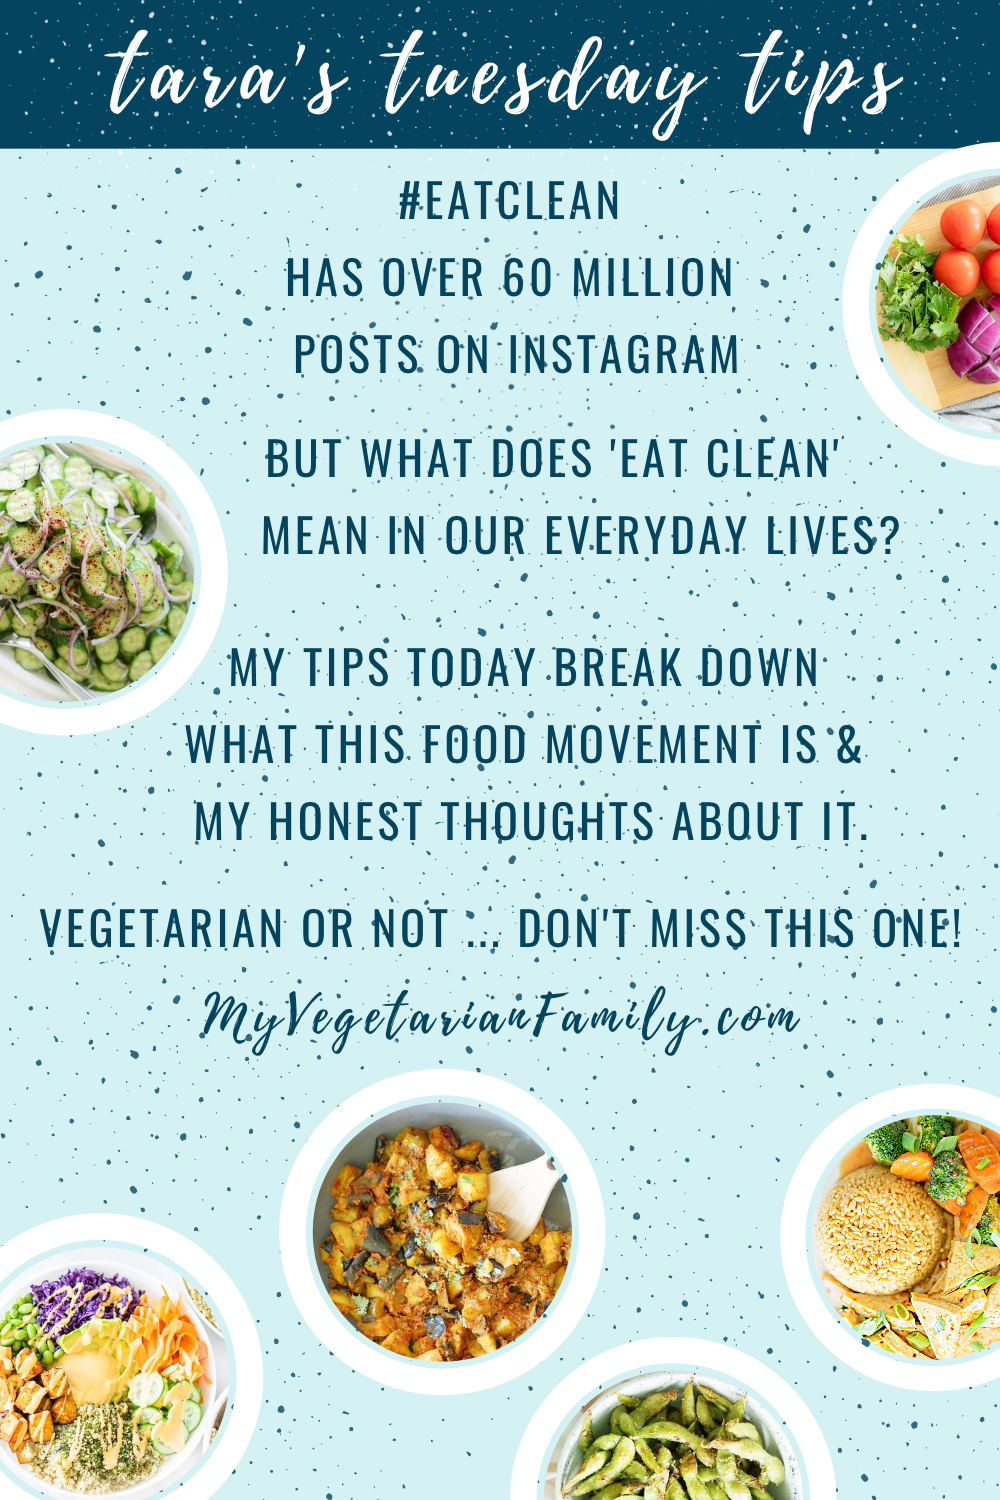 The Truth Behind Clean Eating | My Vegetarian Family | Tara's Tuesday Tips #cleaneating #nutritiontips #dietculture